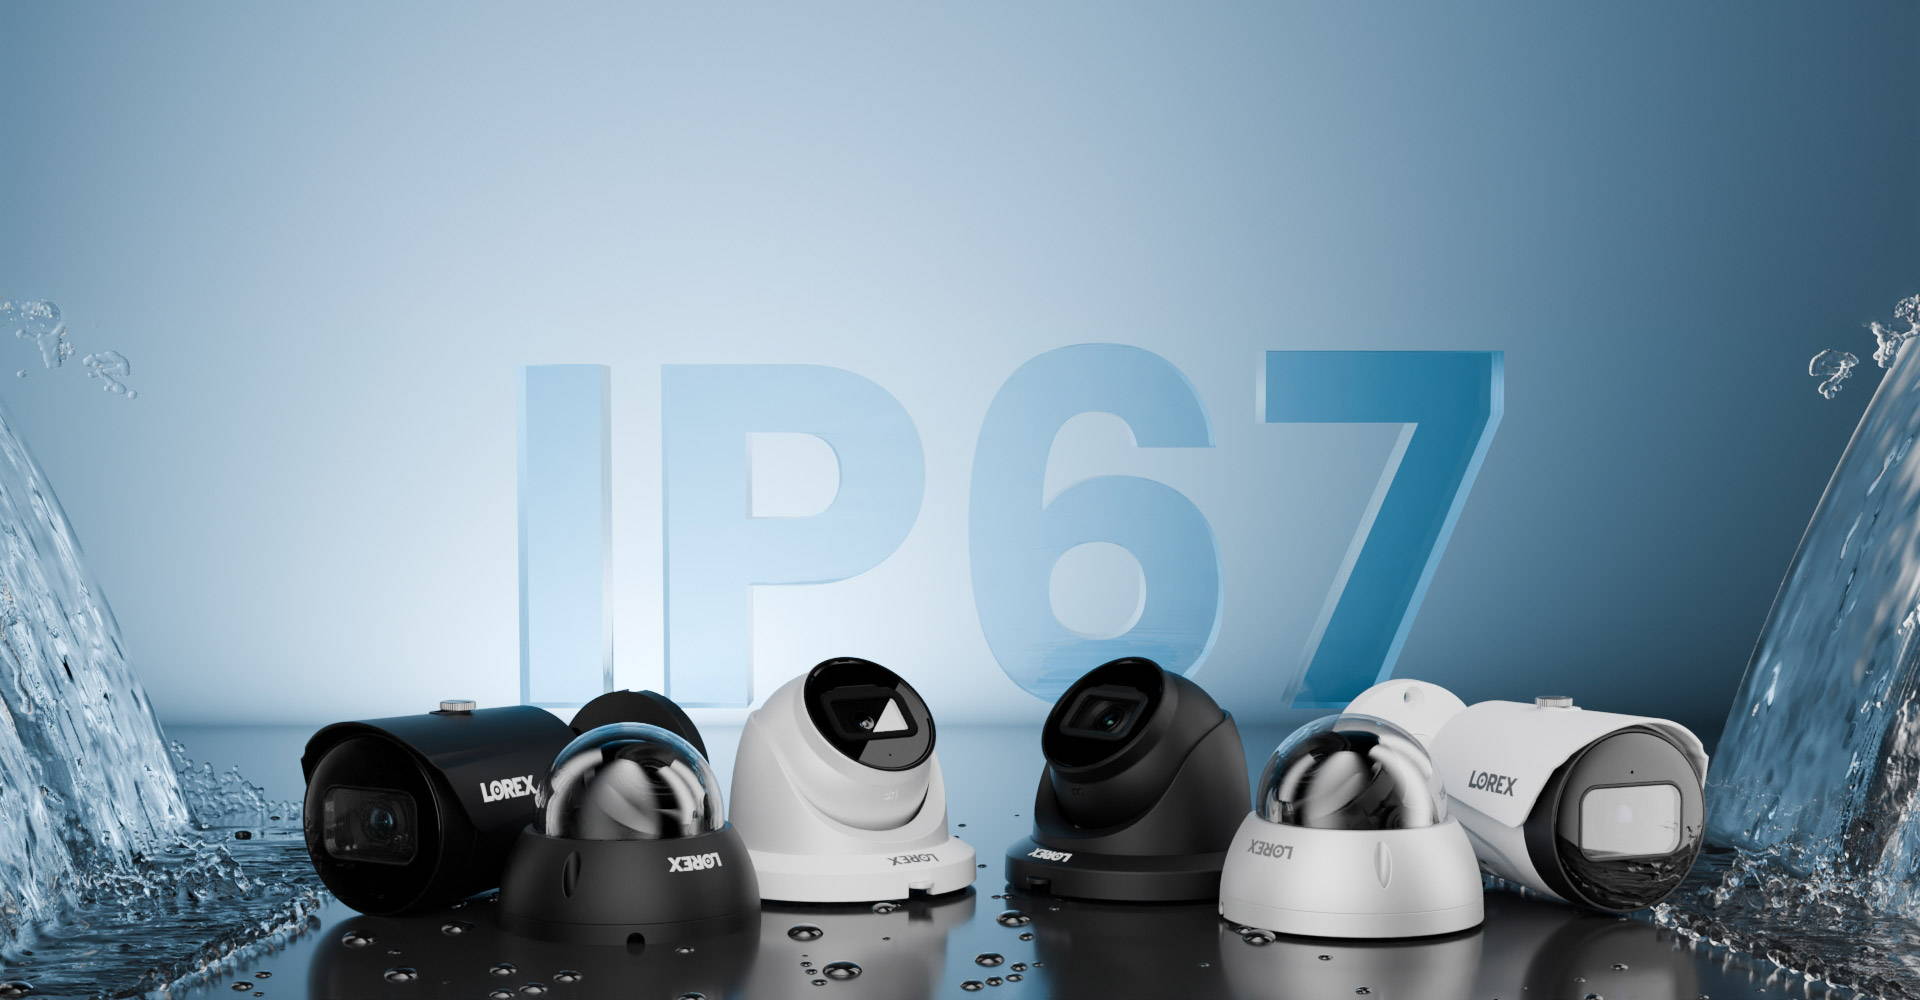 Lorex IP67 Dome and Bullet Security Cameras